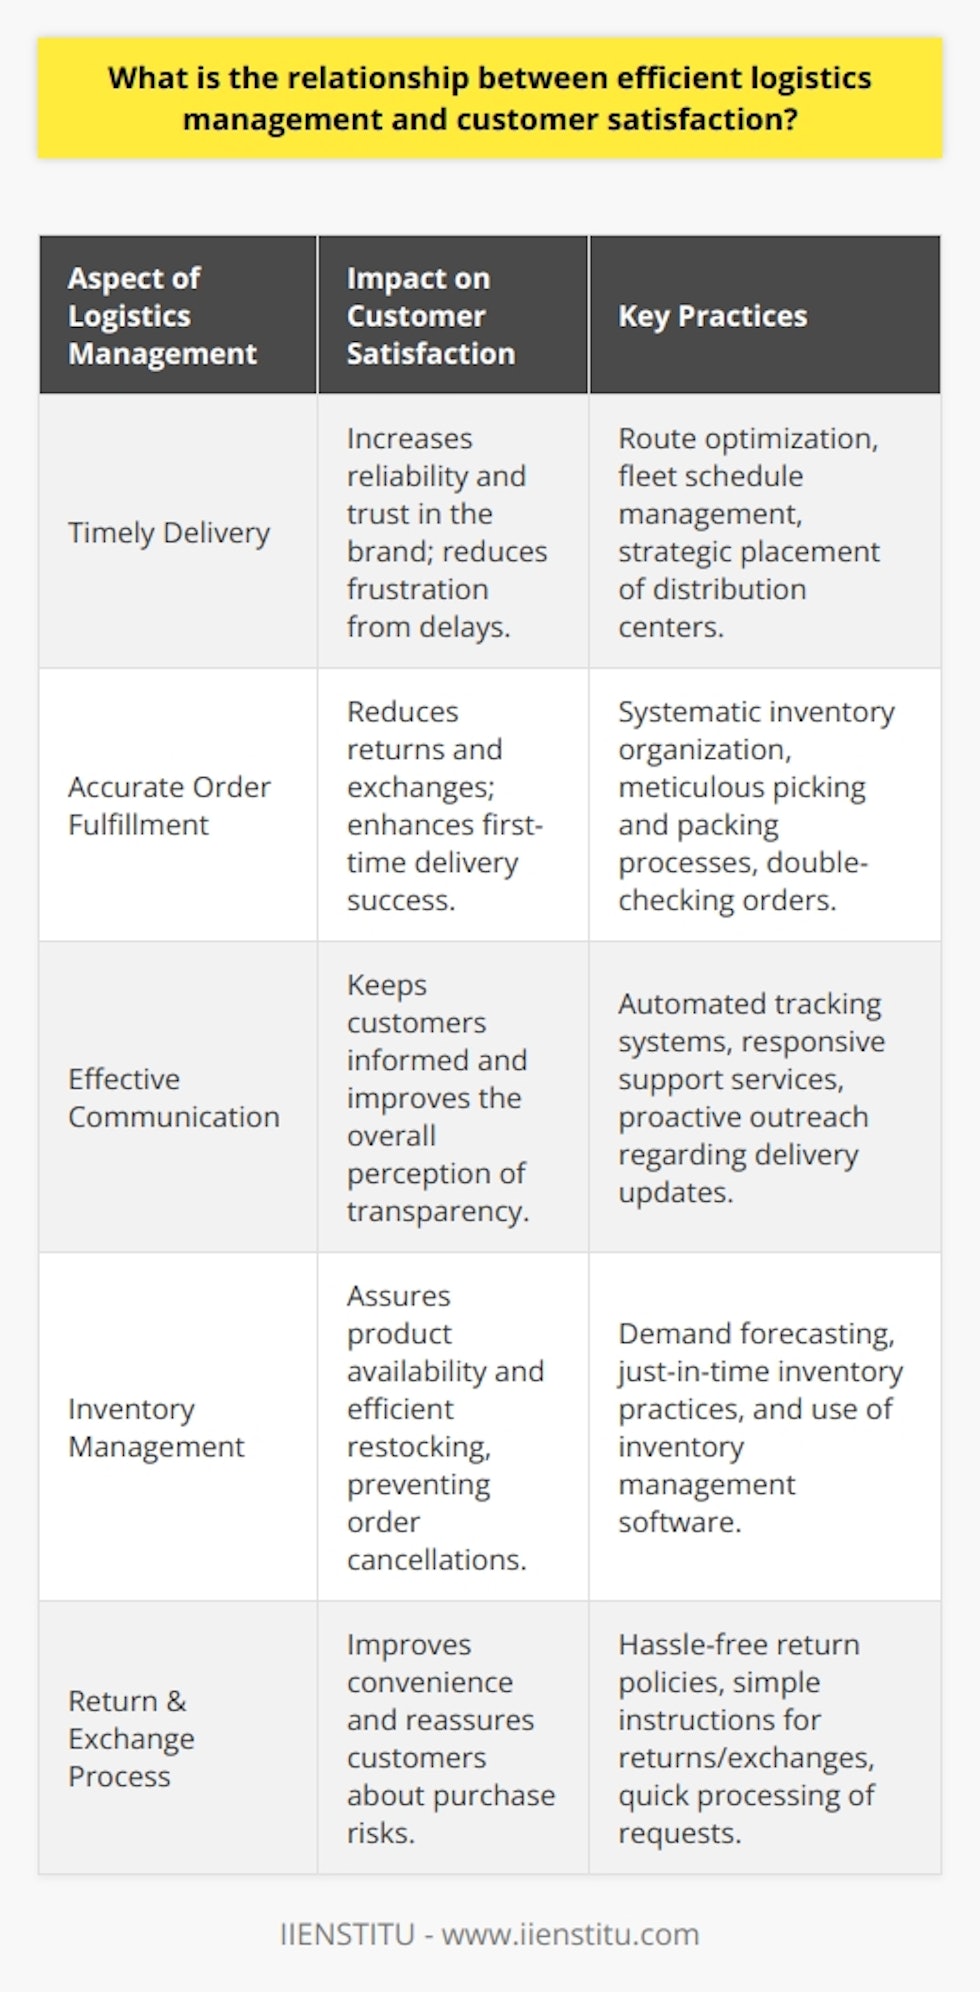 Efficient logistics management is intrinsically linked to the level of satisfaction customers feel regarding their interactions with a company. From the moment an order is placed to the time it lands in the hands of the consumer, the mechanisms of logistics kick into gear, underpinning the overall customer experience.Timely DeliveryTimeliness is a cornerstone of customer satisfaction. Inefficient logistics can lead to delays and missed deadlines, causing customer frustration and potentially eroding trust in a brand. A logistics management system that ensures prompt delivery demonstrates respect for a customer's time and promotes confidence in the company's reliability. Logistics goes beyond mere transportation; it involves the optimization of routes, the management of fleet schedules, and the strategic location of distribution centers to minimize the time between order and delivery.Accurate Order FulfillmentThe precision with which orders are picked, packed, and shipped also significantly affects customer satisfaction. Efficient logistics management involves the systematic organization of inventory, flawless picking and packing processes, and thorough double-checking mechanisms to avert mistakes. The result of such meticulous practices is a higher rate of first-time delivery success, which reduces the cost and time associated with returns and exchanges, and ultimately contributes to positive customer perceptions and satisfaction.Effective CommunicationCommunication is the thread that ties the logistics process and customer experience together. Transparent logistics management empowers customers with the knowledge of their order's status, from pre-shipping phases through to final delivery. Communication channels that are open, responsive, and equipped to provide real-time updates are an essential facet of modern logistics management. This includes automated tracking systems, responsive support services, and clear, proactive outreach to customers in case of any potential hiccups along the delivery path.ConclusionIn conclusion, the symbiotic relationship between effective logistics management and customer satisfaction is undeniable. Each aspect, from timely delivery to accurate order fulfillment, and robust communication, works in concert to build a rapport with customers based on reliability, trust, and convenience. An investment in refining logistics practices is an investment in customer retention and satisfaction, and it positions a company to outpace competitors in the race to win customer loyalty. Efficient logistics is not merely an operational requirement; it is a strategic imperative that, when executed well, becomes a brand differentiator and a hallmark of quality customer service.